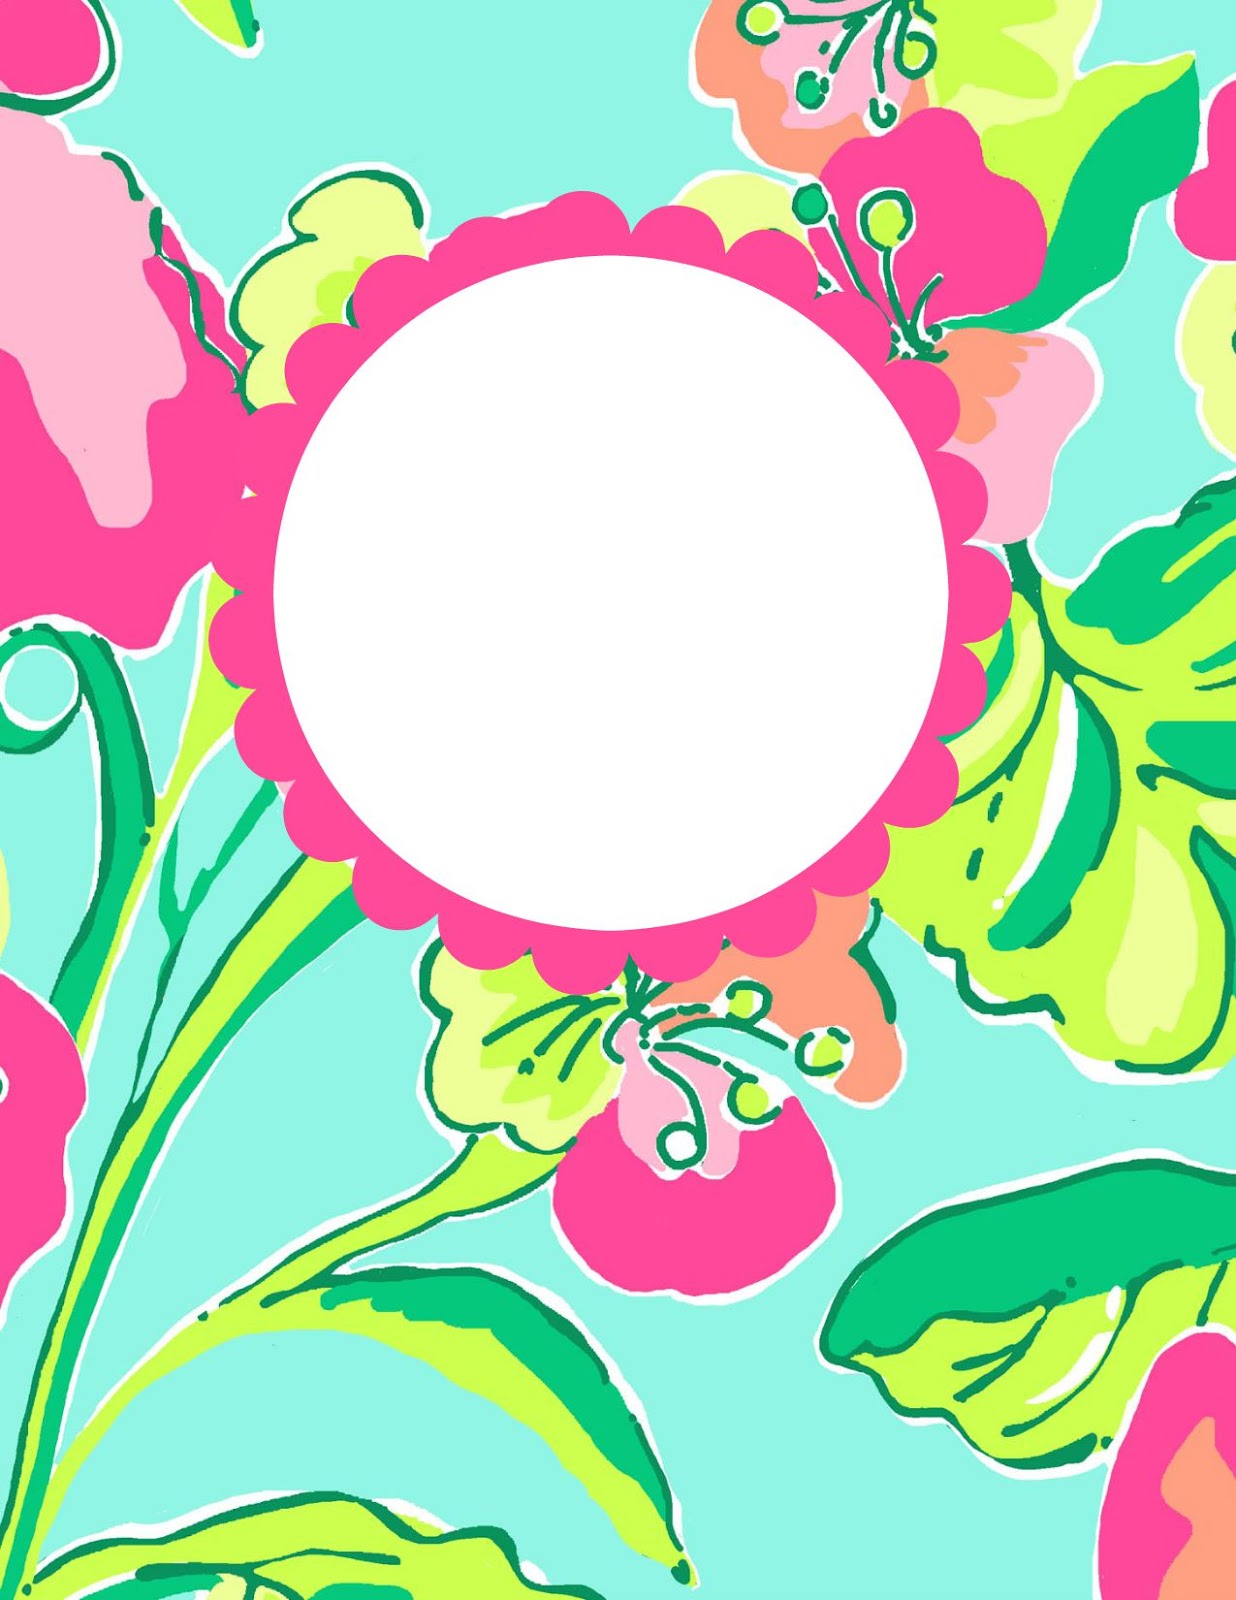 free-preppy-lilly-pulitzer-binder-covers-printables-for-school